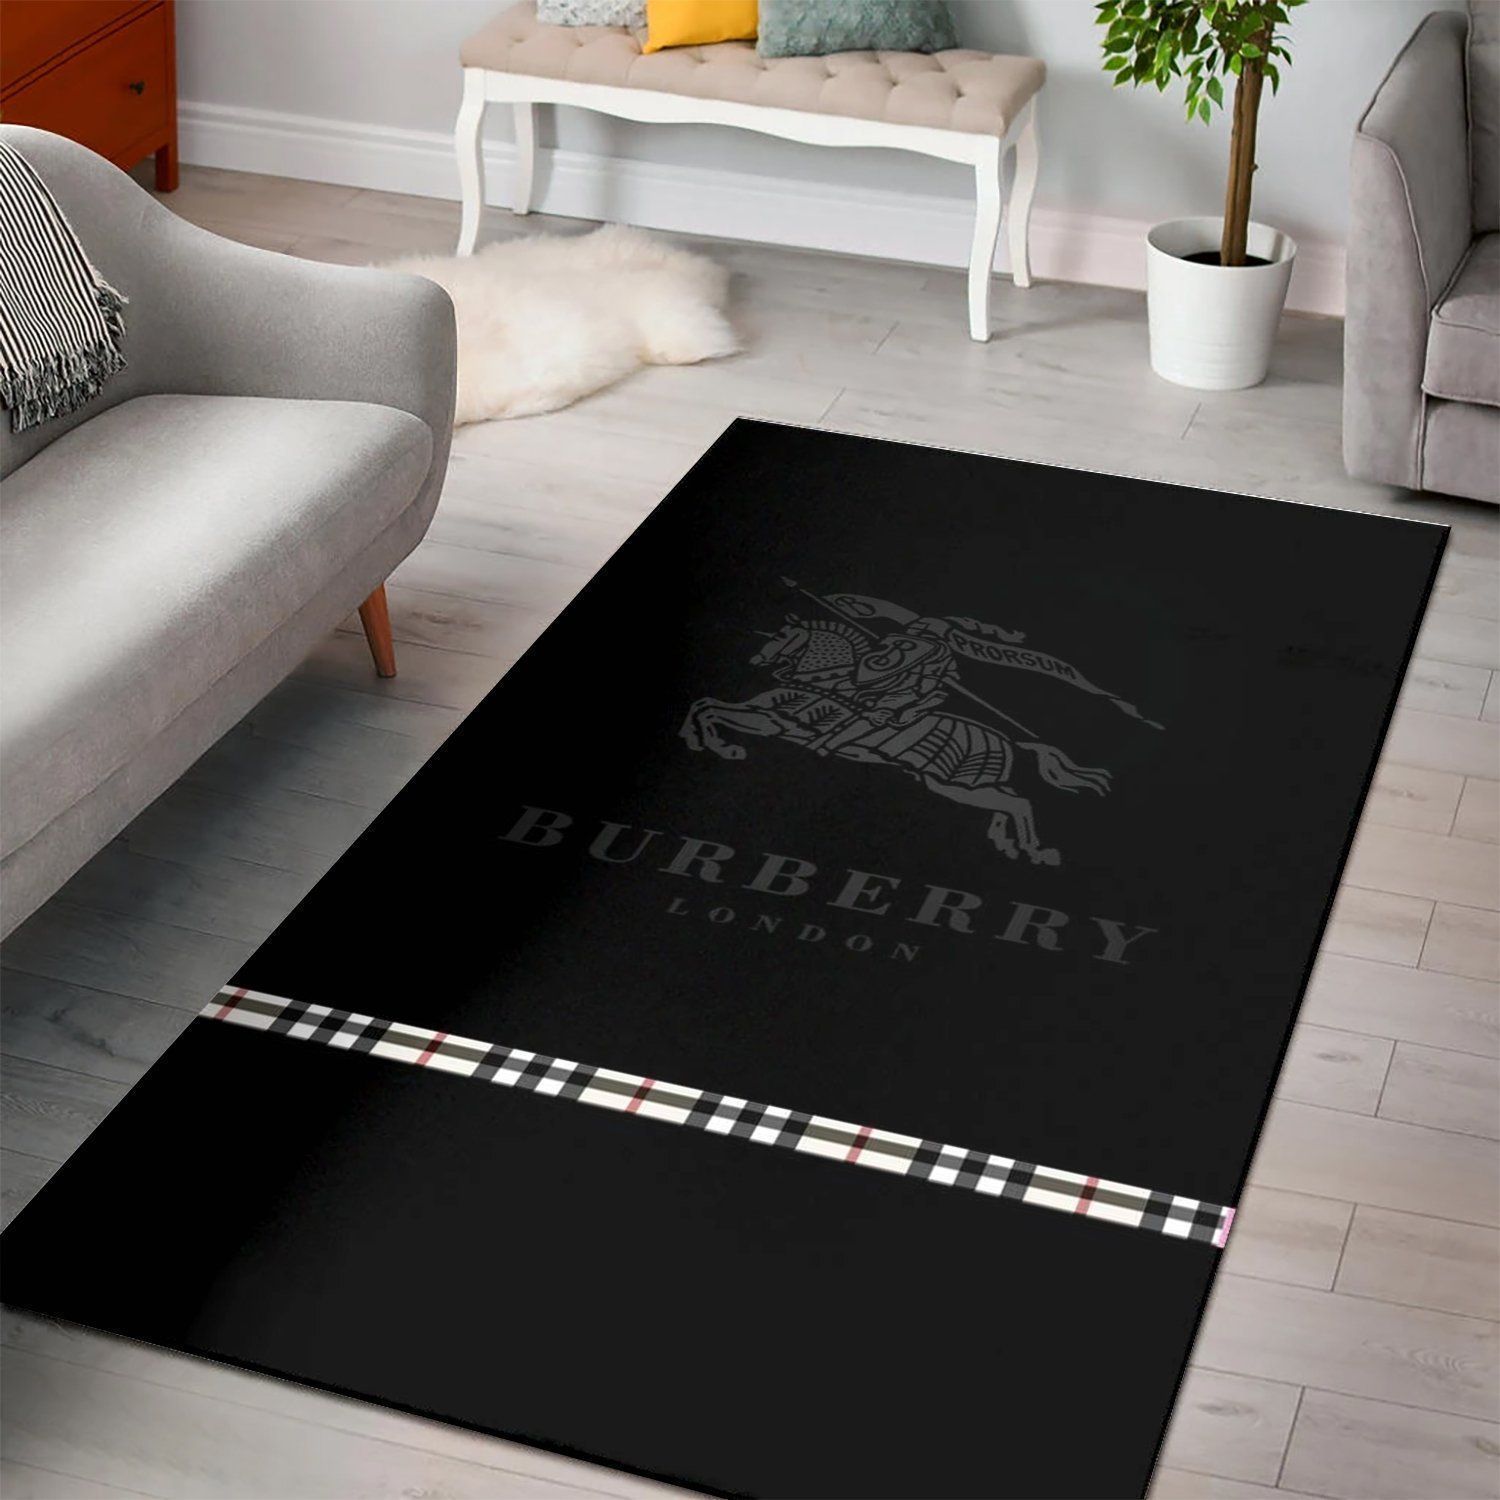 Burberry Luxury Brand 21 Area Rug Living Room And Bedroom Rug Us Gift Decor VH3